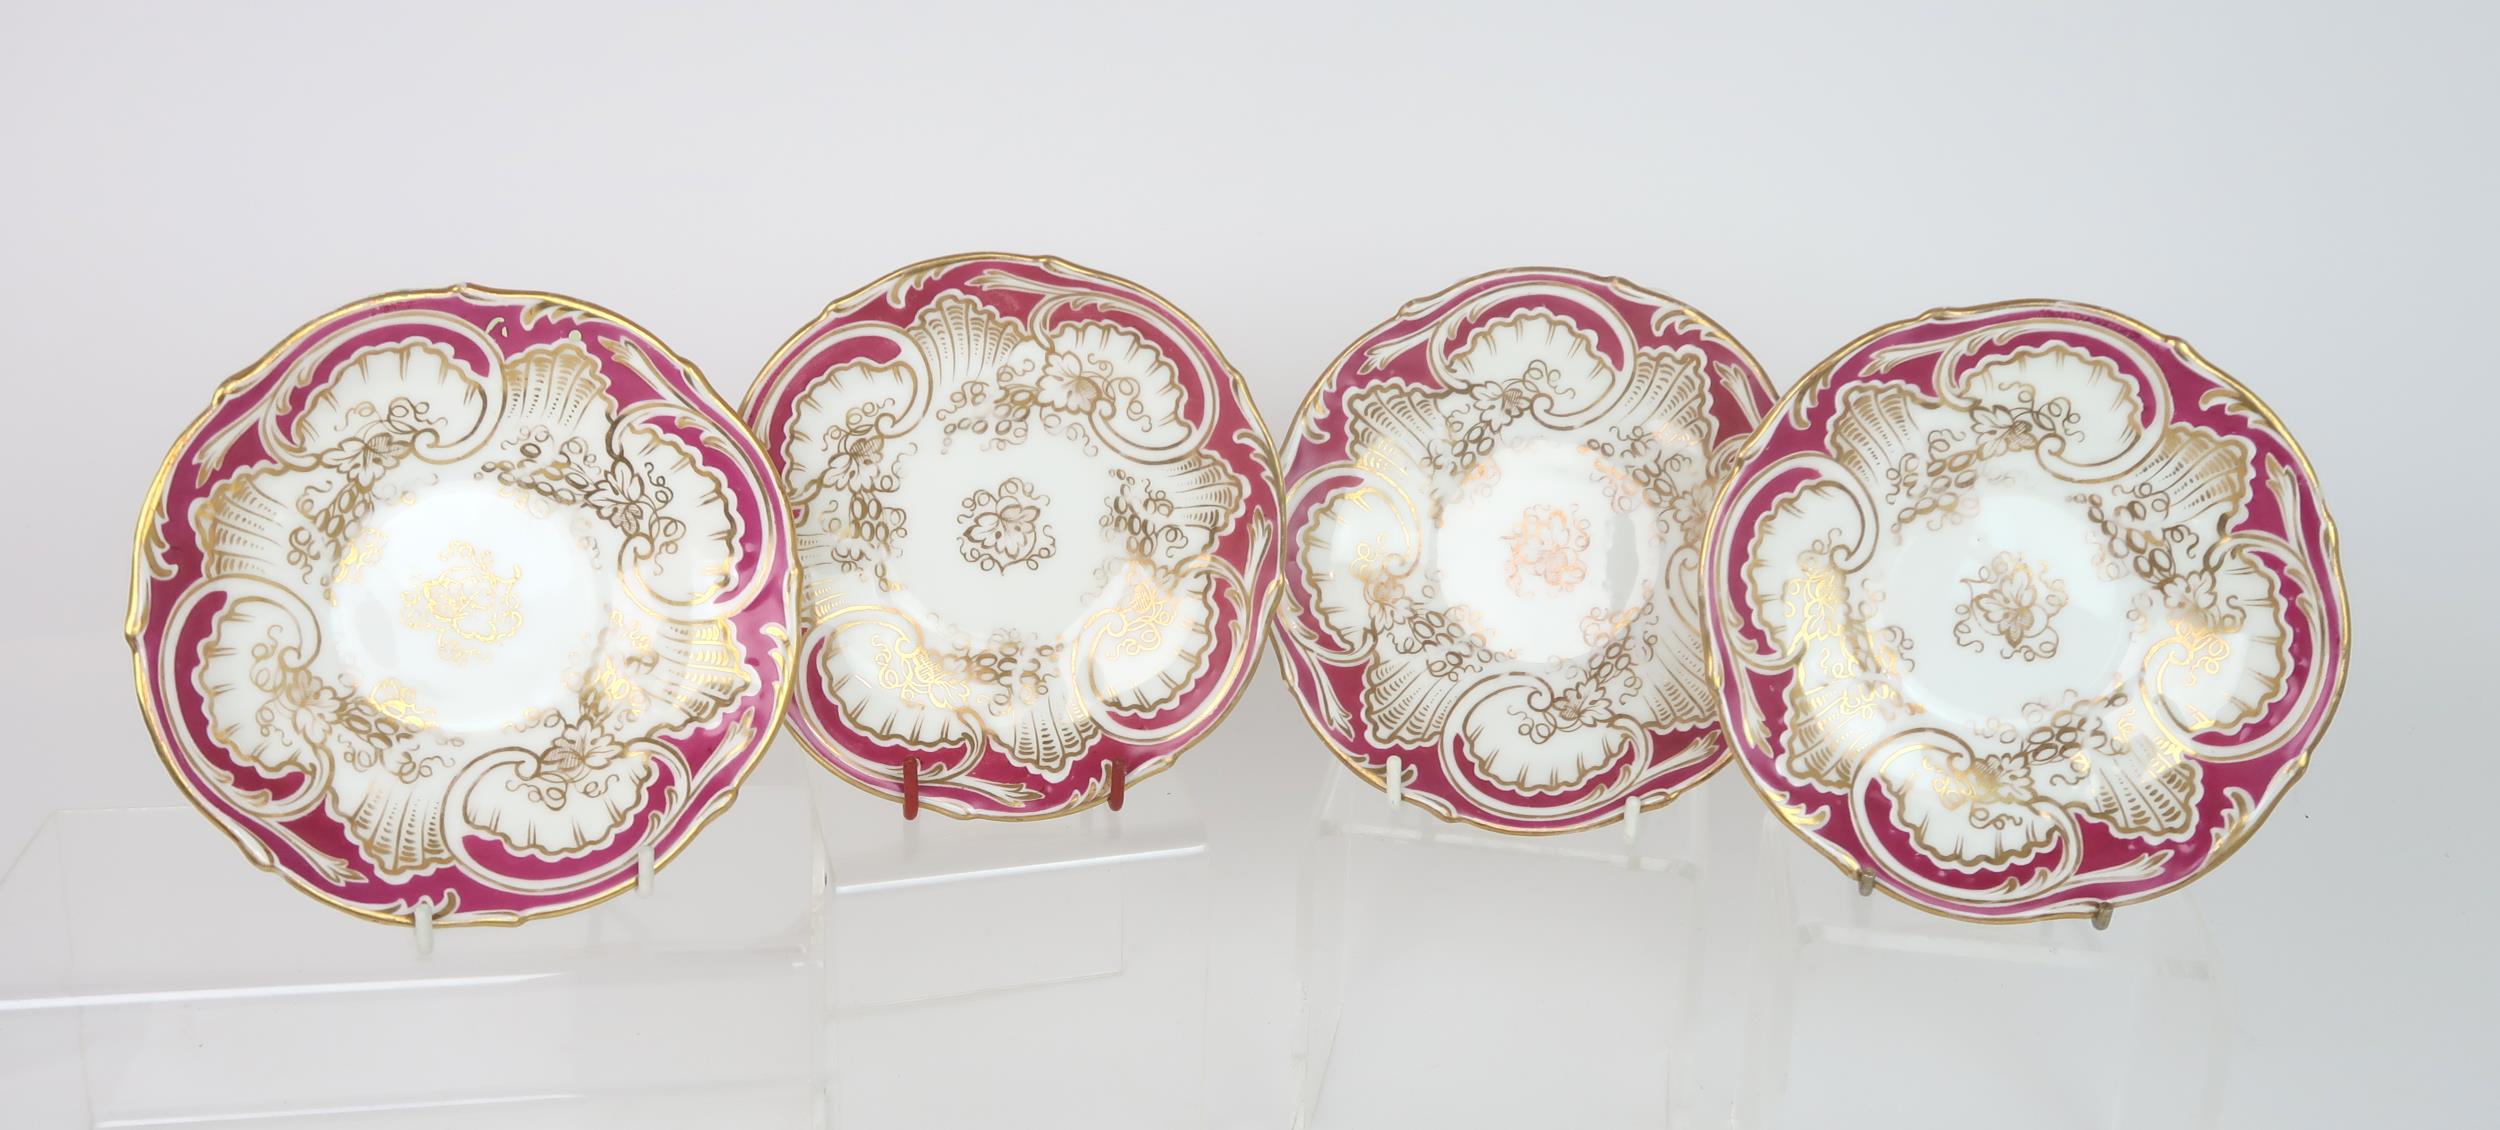 A ROCKINGHAM STYLE TEASET of moulded rococo design, the white ground with gilt vine and grape - Image 4 of 7